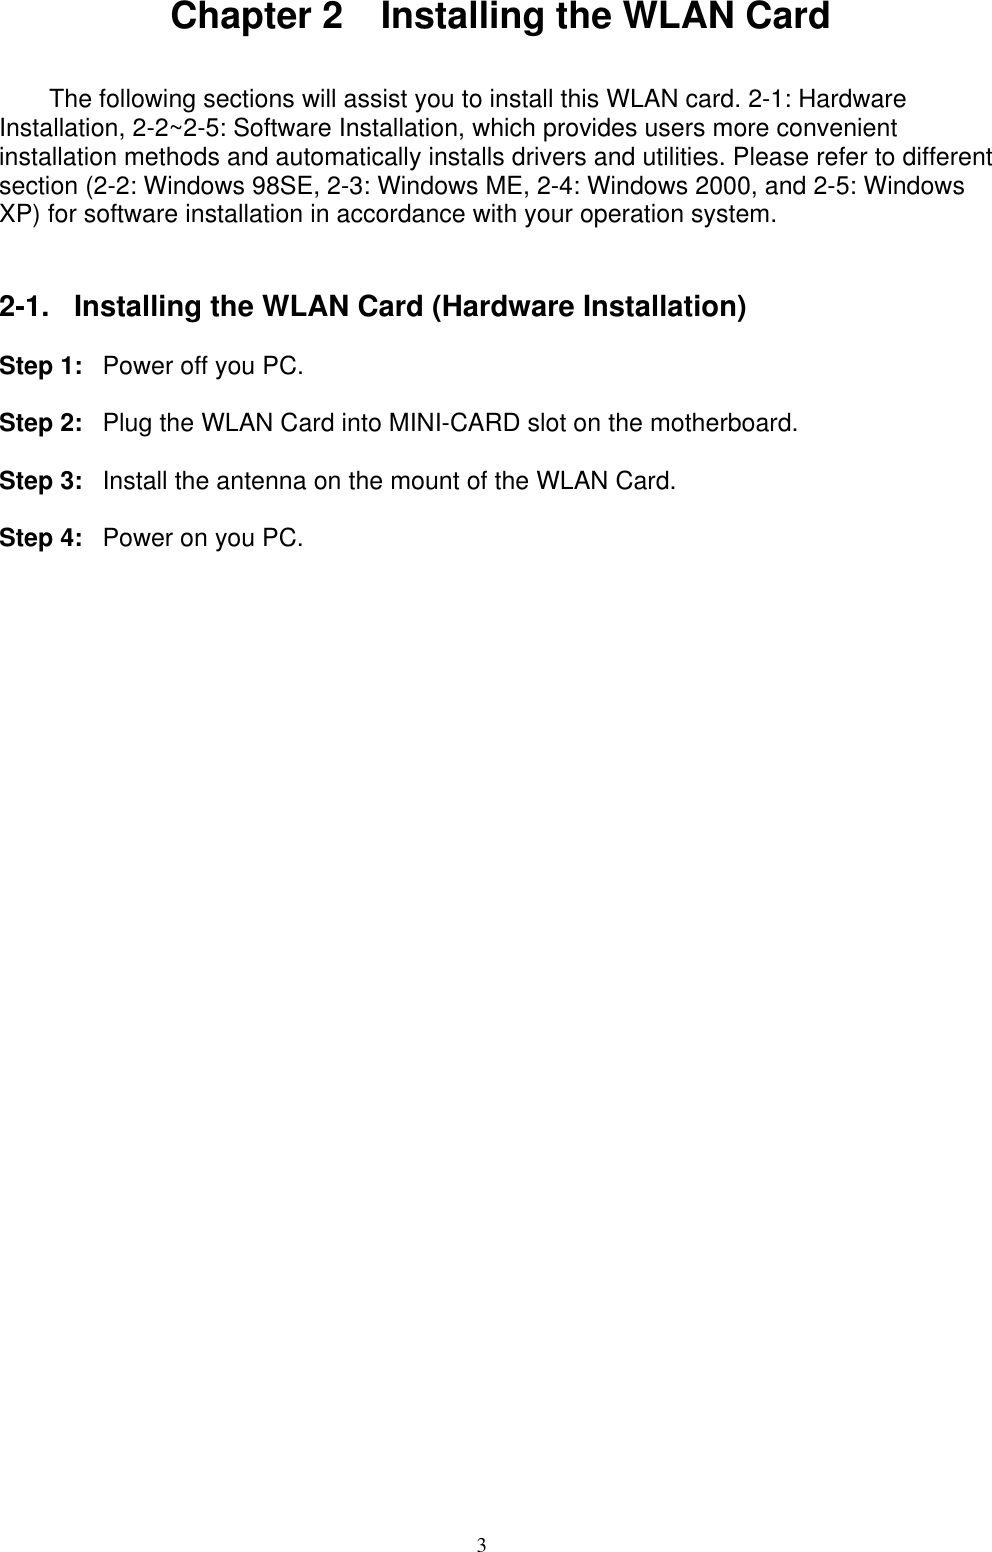 3   Chapter 2    Installing the WLAN Card   The following sections will assist you to install this WLAN card. 2-1: Hardware Installation, 2-2~2-5: Software Installation, which provides users more convenient installation methods and automatically installs drivers and utilities. Please refer to different section (2-2: Windows 98SE, 2-3: Windows ME, 2-4: Windows 2000, and 2-5: Windows XP) for software installation in accordance with your operation system.   2-1.  Installing the WLAN Card (Hardware Installation)  Step 1:  Power off you PC.  Step 2:  Plug the WLAN Card into MINI-CARD slot on the motherboard.  Step 3:  Install the antenna on the mount of the WLAN Card.  Step 4:  Power on you PC.  